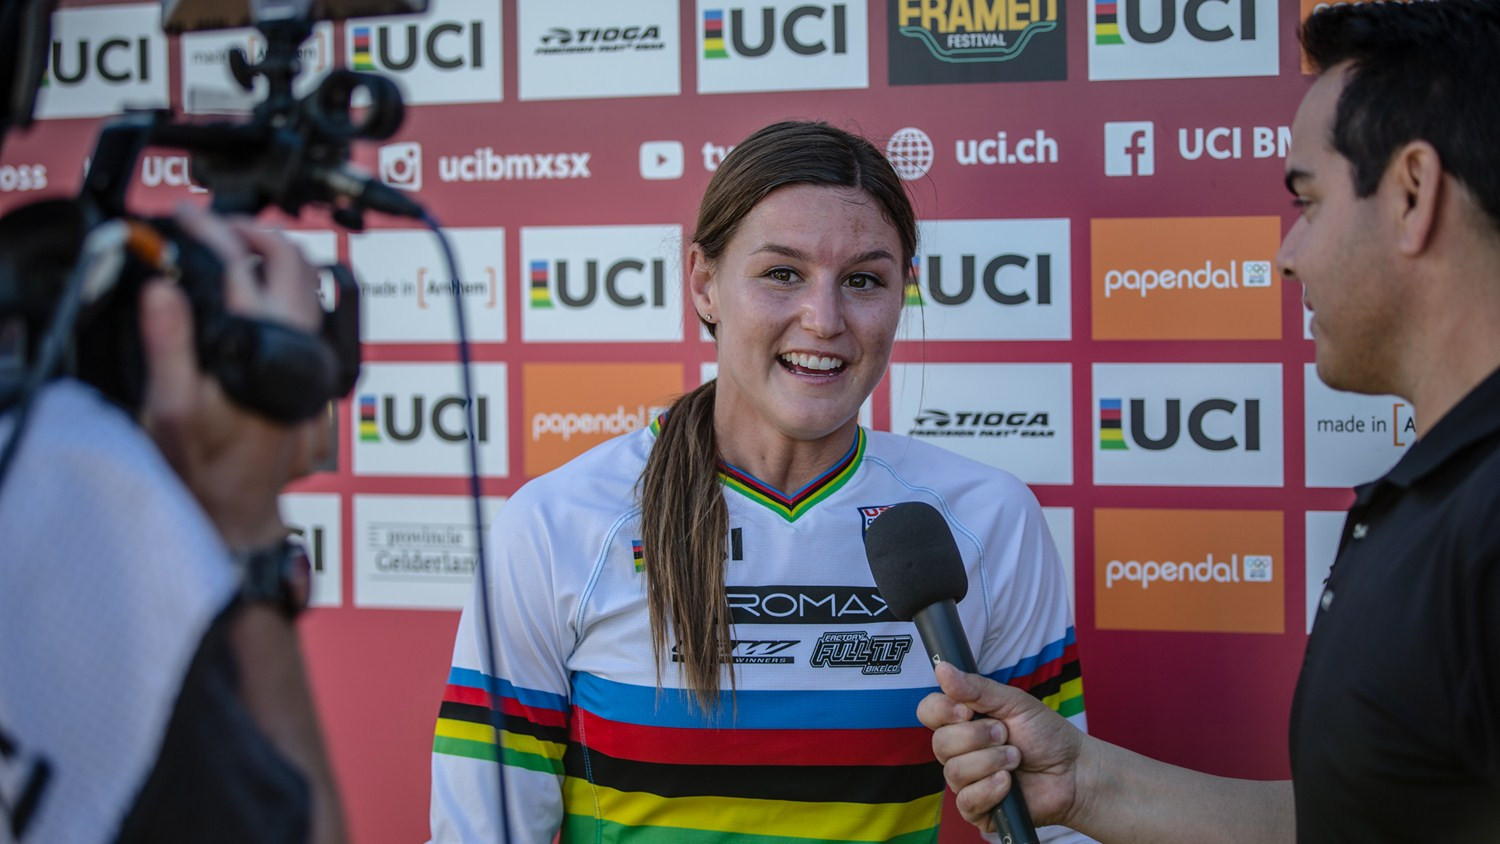 World champion Alise Willoughby will hope to back up her victory in the second race in Papendal ©UCI/Craig Dutton